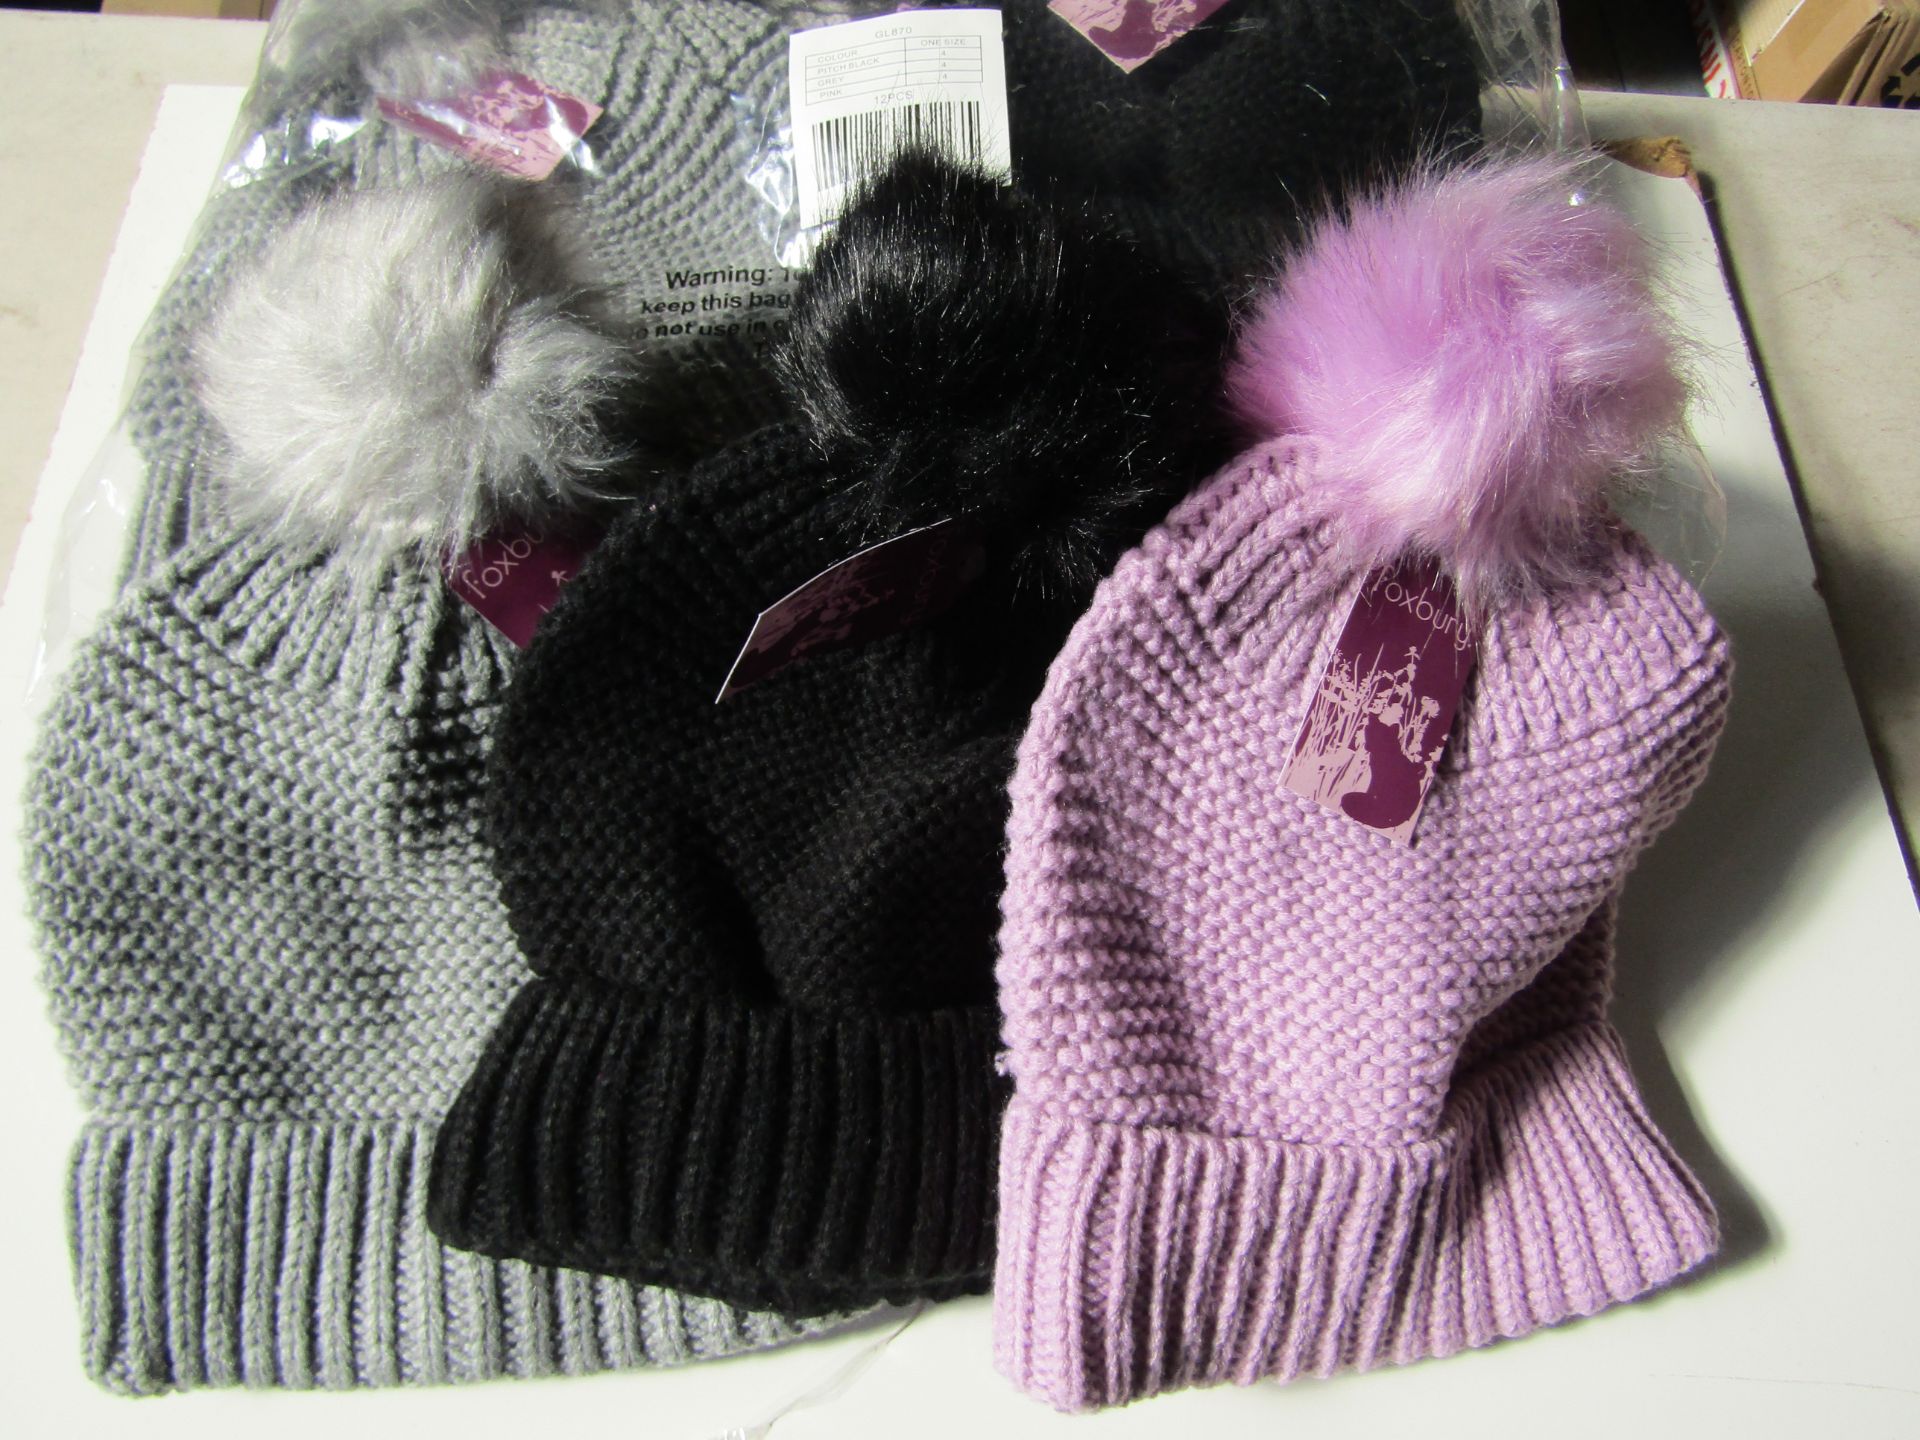 12 X Ladies Textured Bobble Hats Black Grey Pink 4 of Each New & Packaged